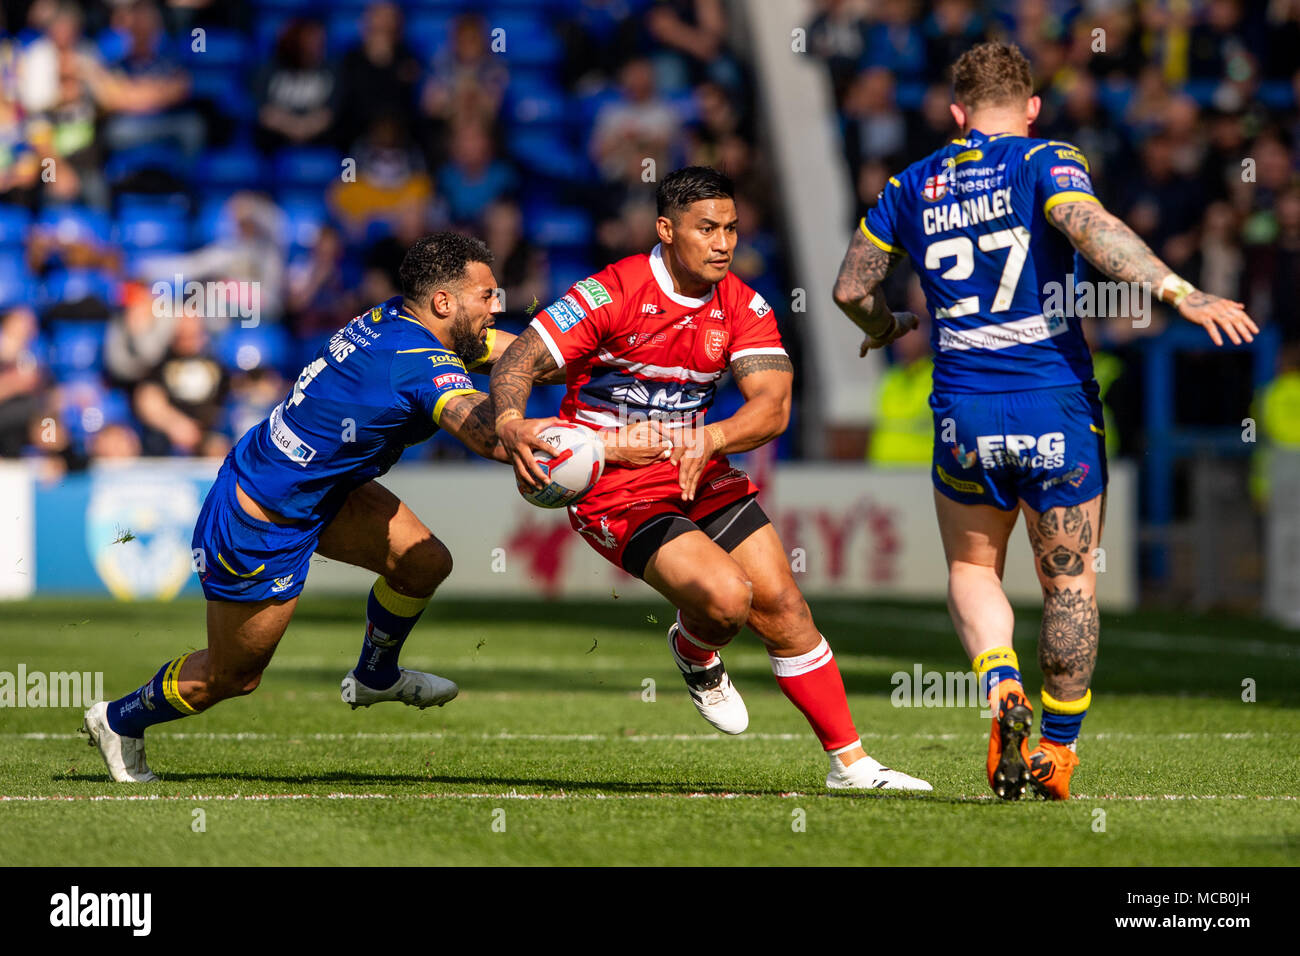 Hull's Taioalo Vaivai is tackled by Warrington Wolves's Ryan Atkins  14th April 2018 , The Halliwell Jones Stadium Mike Gregory Way, Warrington, WA2 7NE, England;  Betfred Super League rugby, Round 11, Warrington Wolves v Hull Kingston Rovers Stock Photo